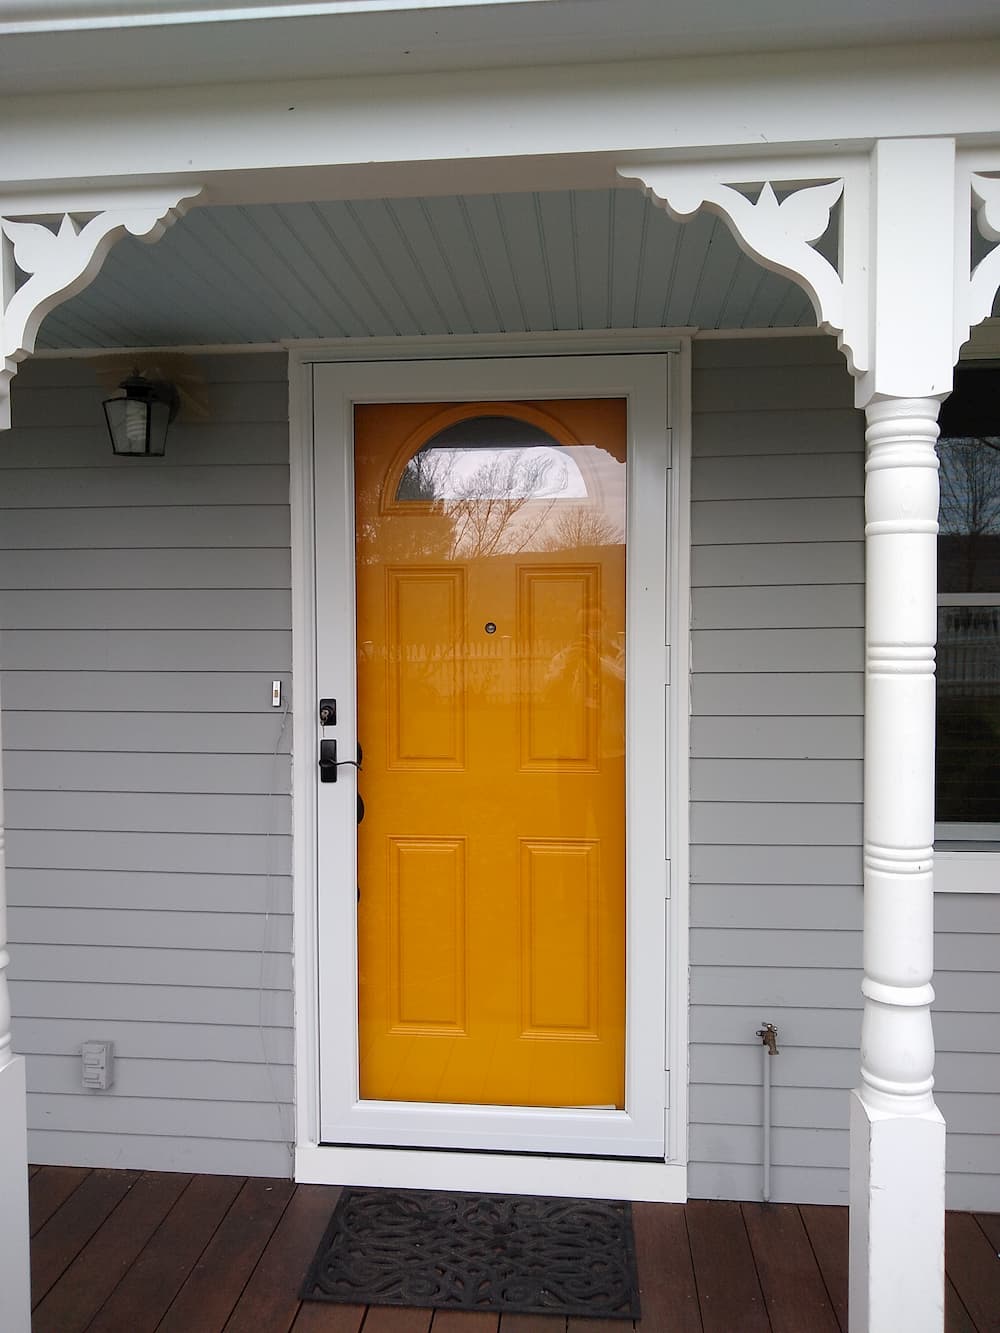 After photo of the new Pella entry door in a Lenox home